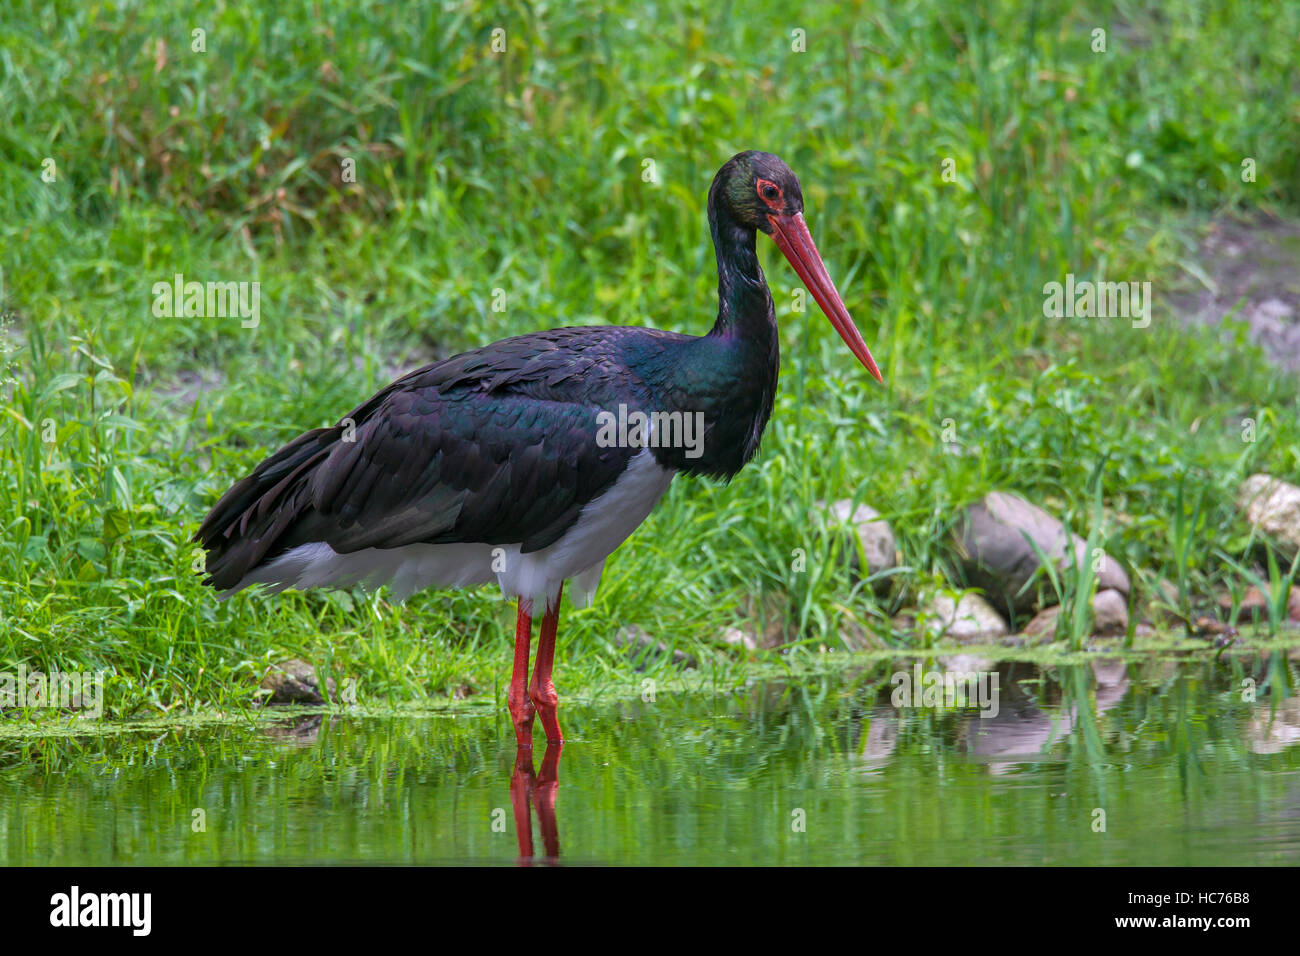 Black stork (Ciconia nigra) foraging in shallow water of pond Stock Photo